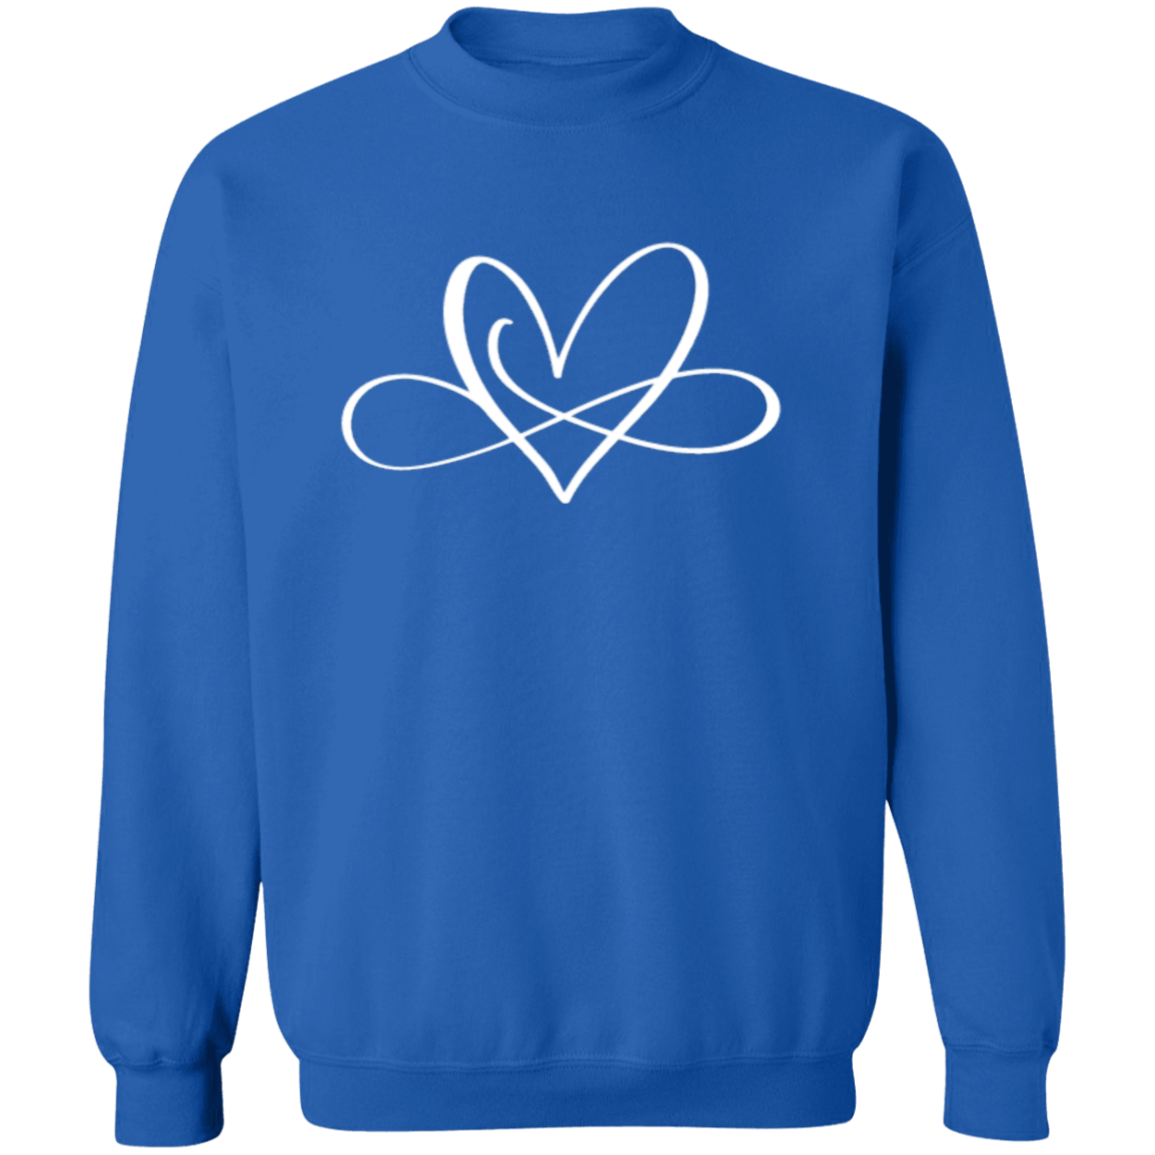 Endless Love: 💘Heart-Infinity Valentine's Day Sweatshirt, Valentine's Day Gift for Wife, Valentine's Day Gift for Girlfriend, Valentine's Day Gift for Her